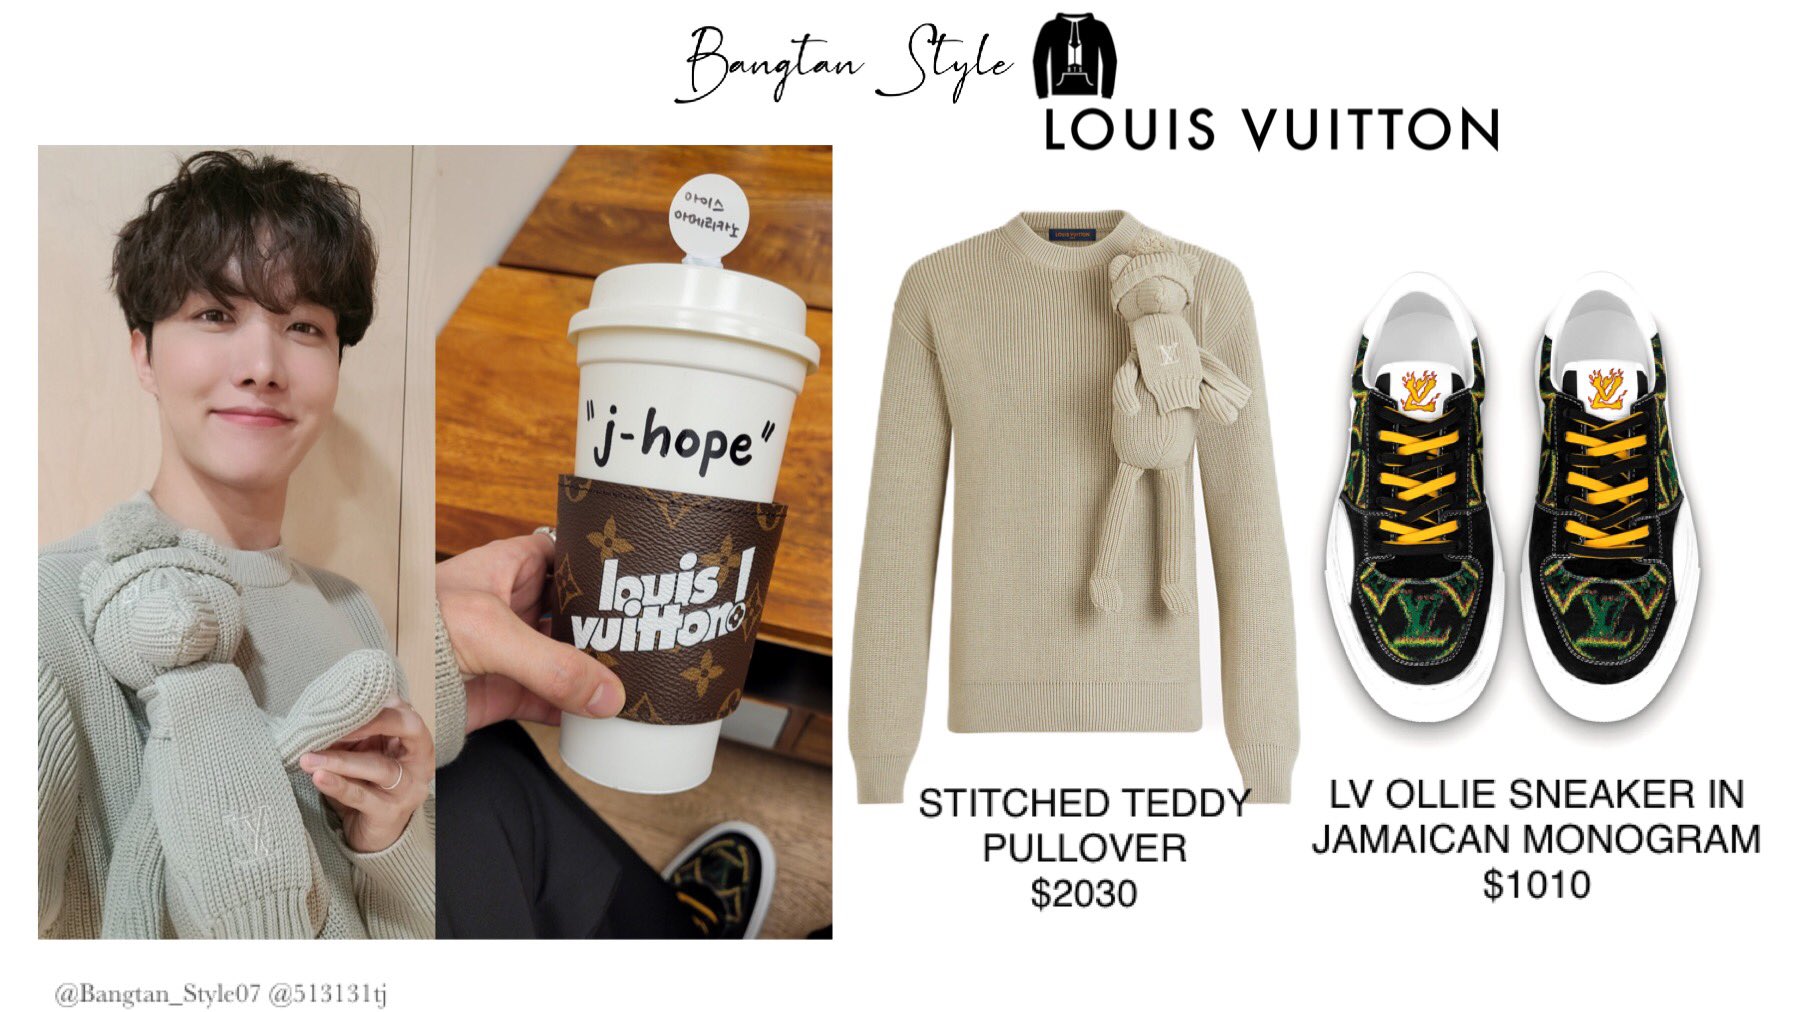 J-hope's Louis Vuitton sweater and - BTS ARMY Bulacan